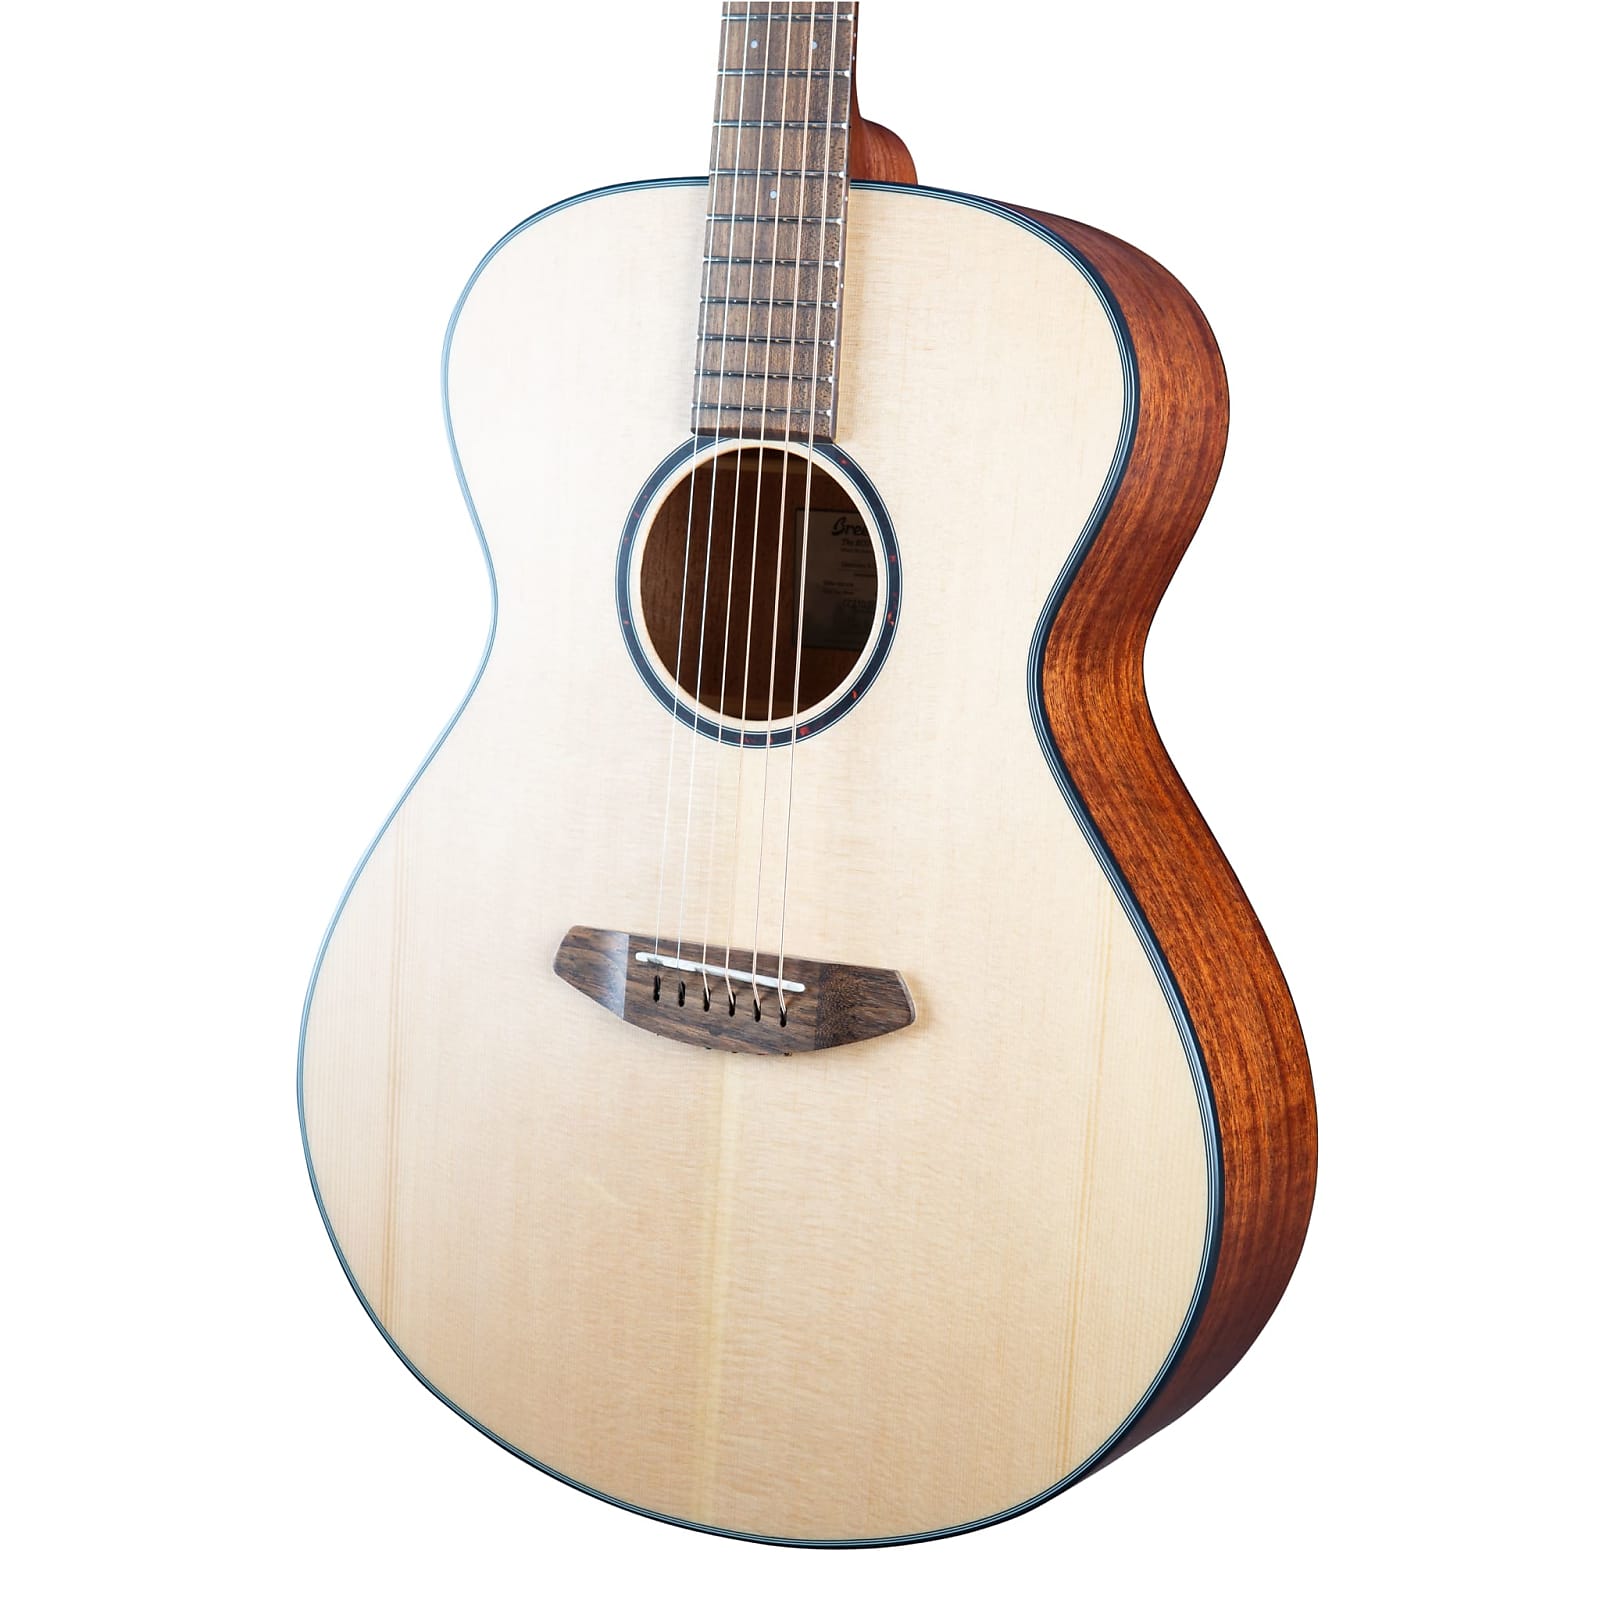 Breedlove Discovery S Concert LH Sitka-African Mahogany